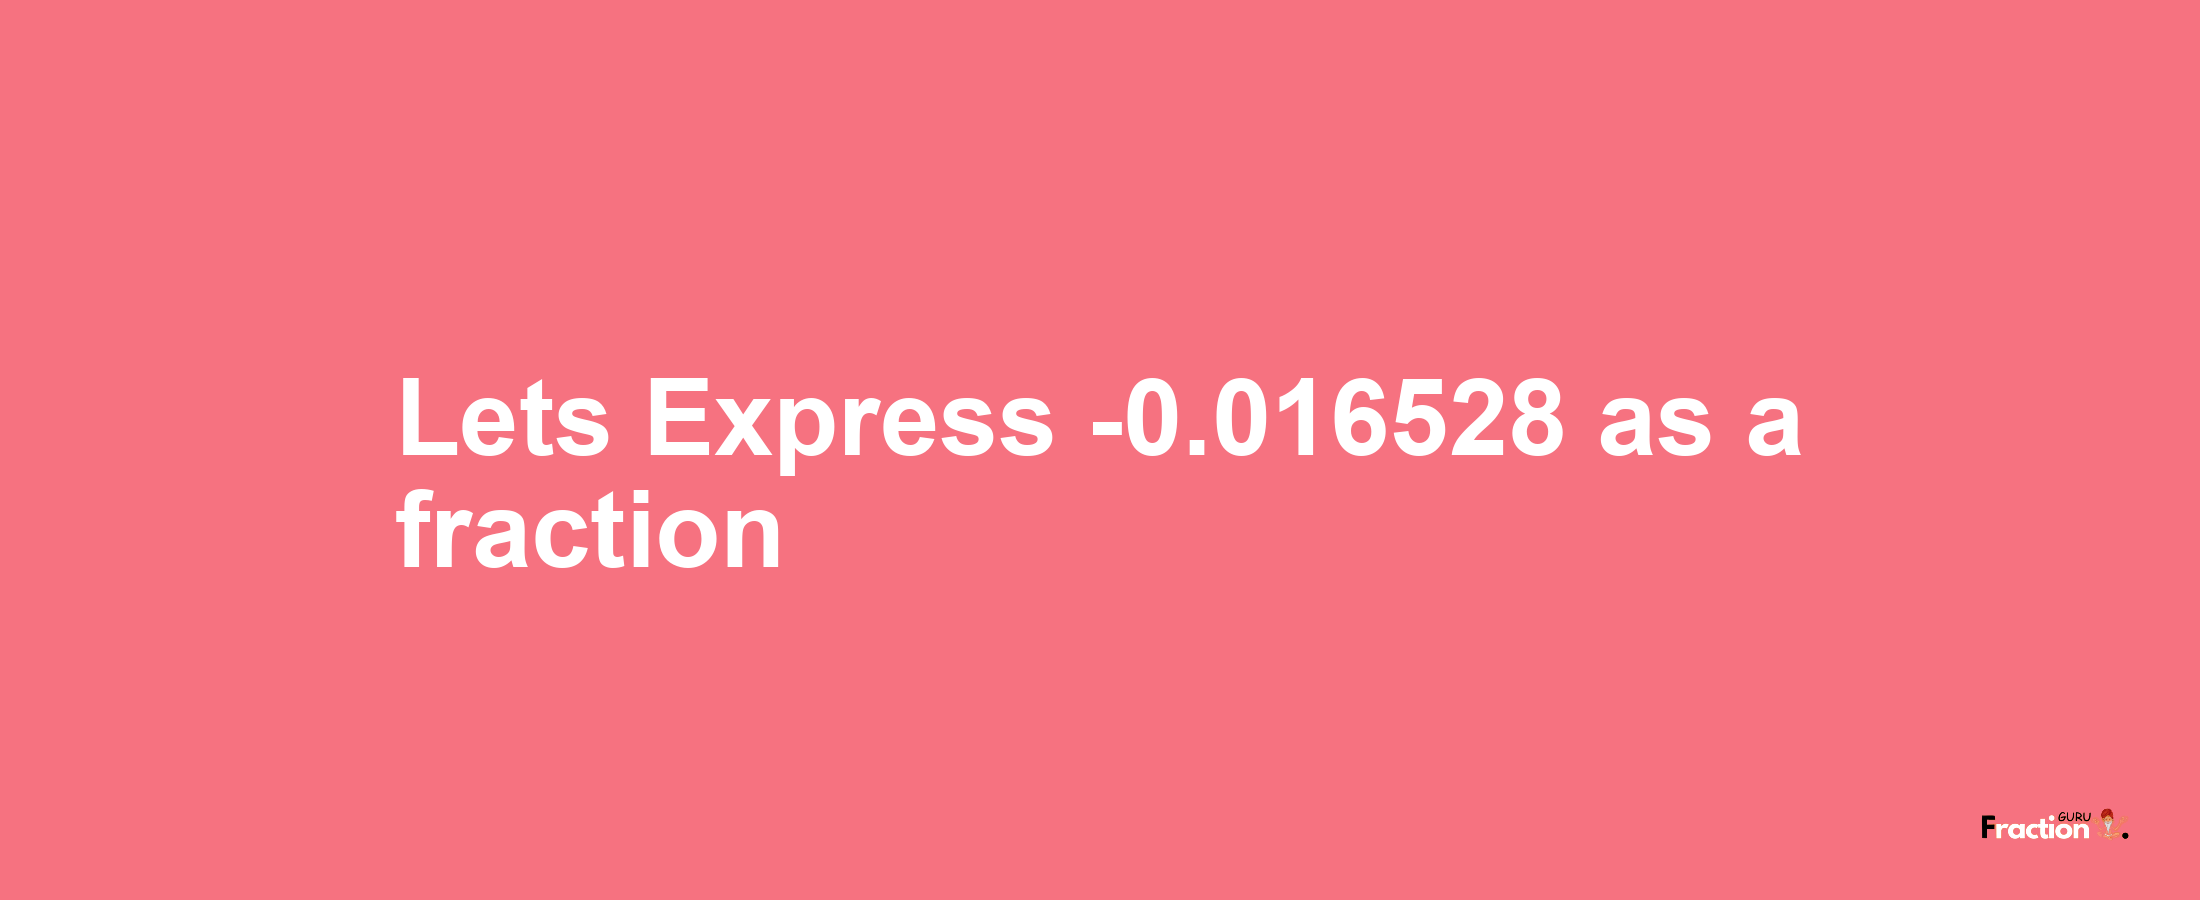 Lets Express -0.016528 as afraction